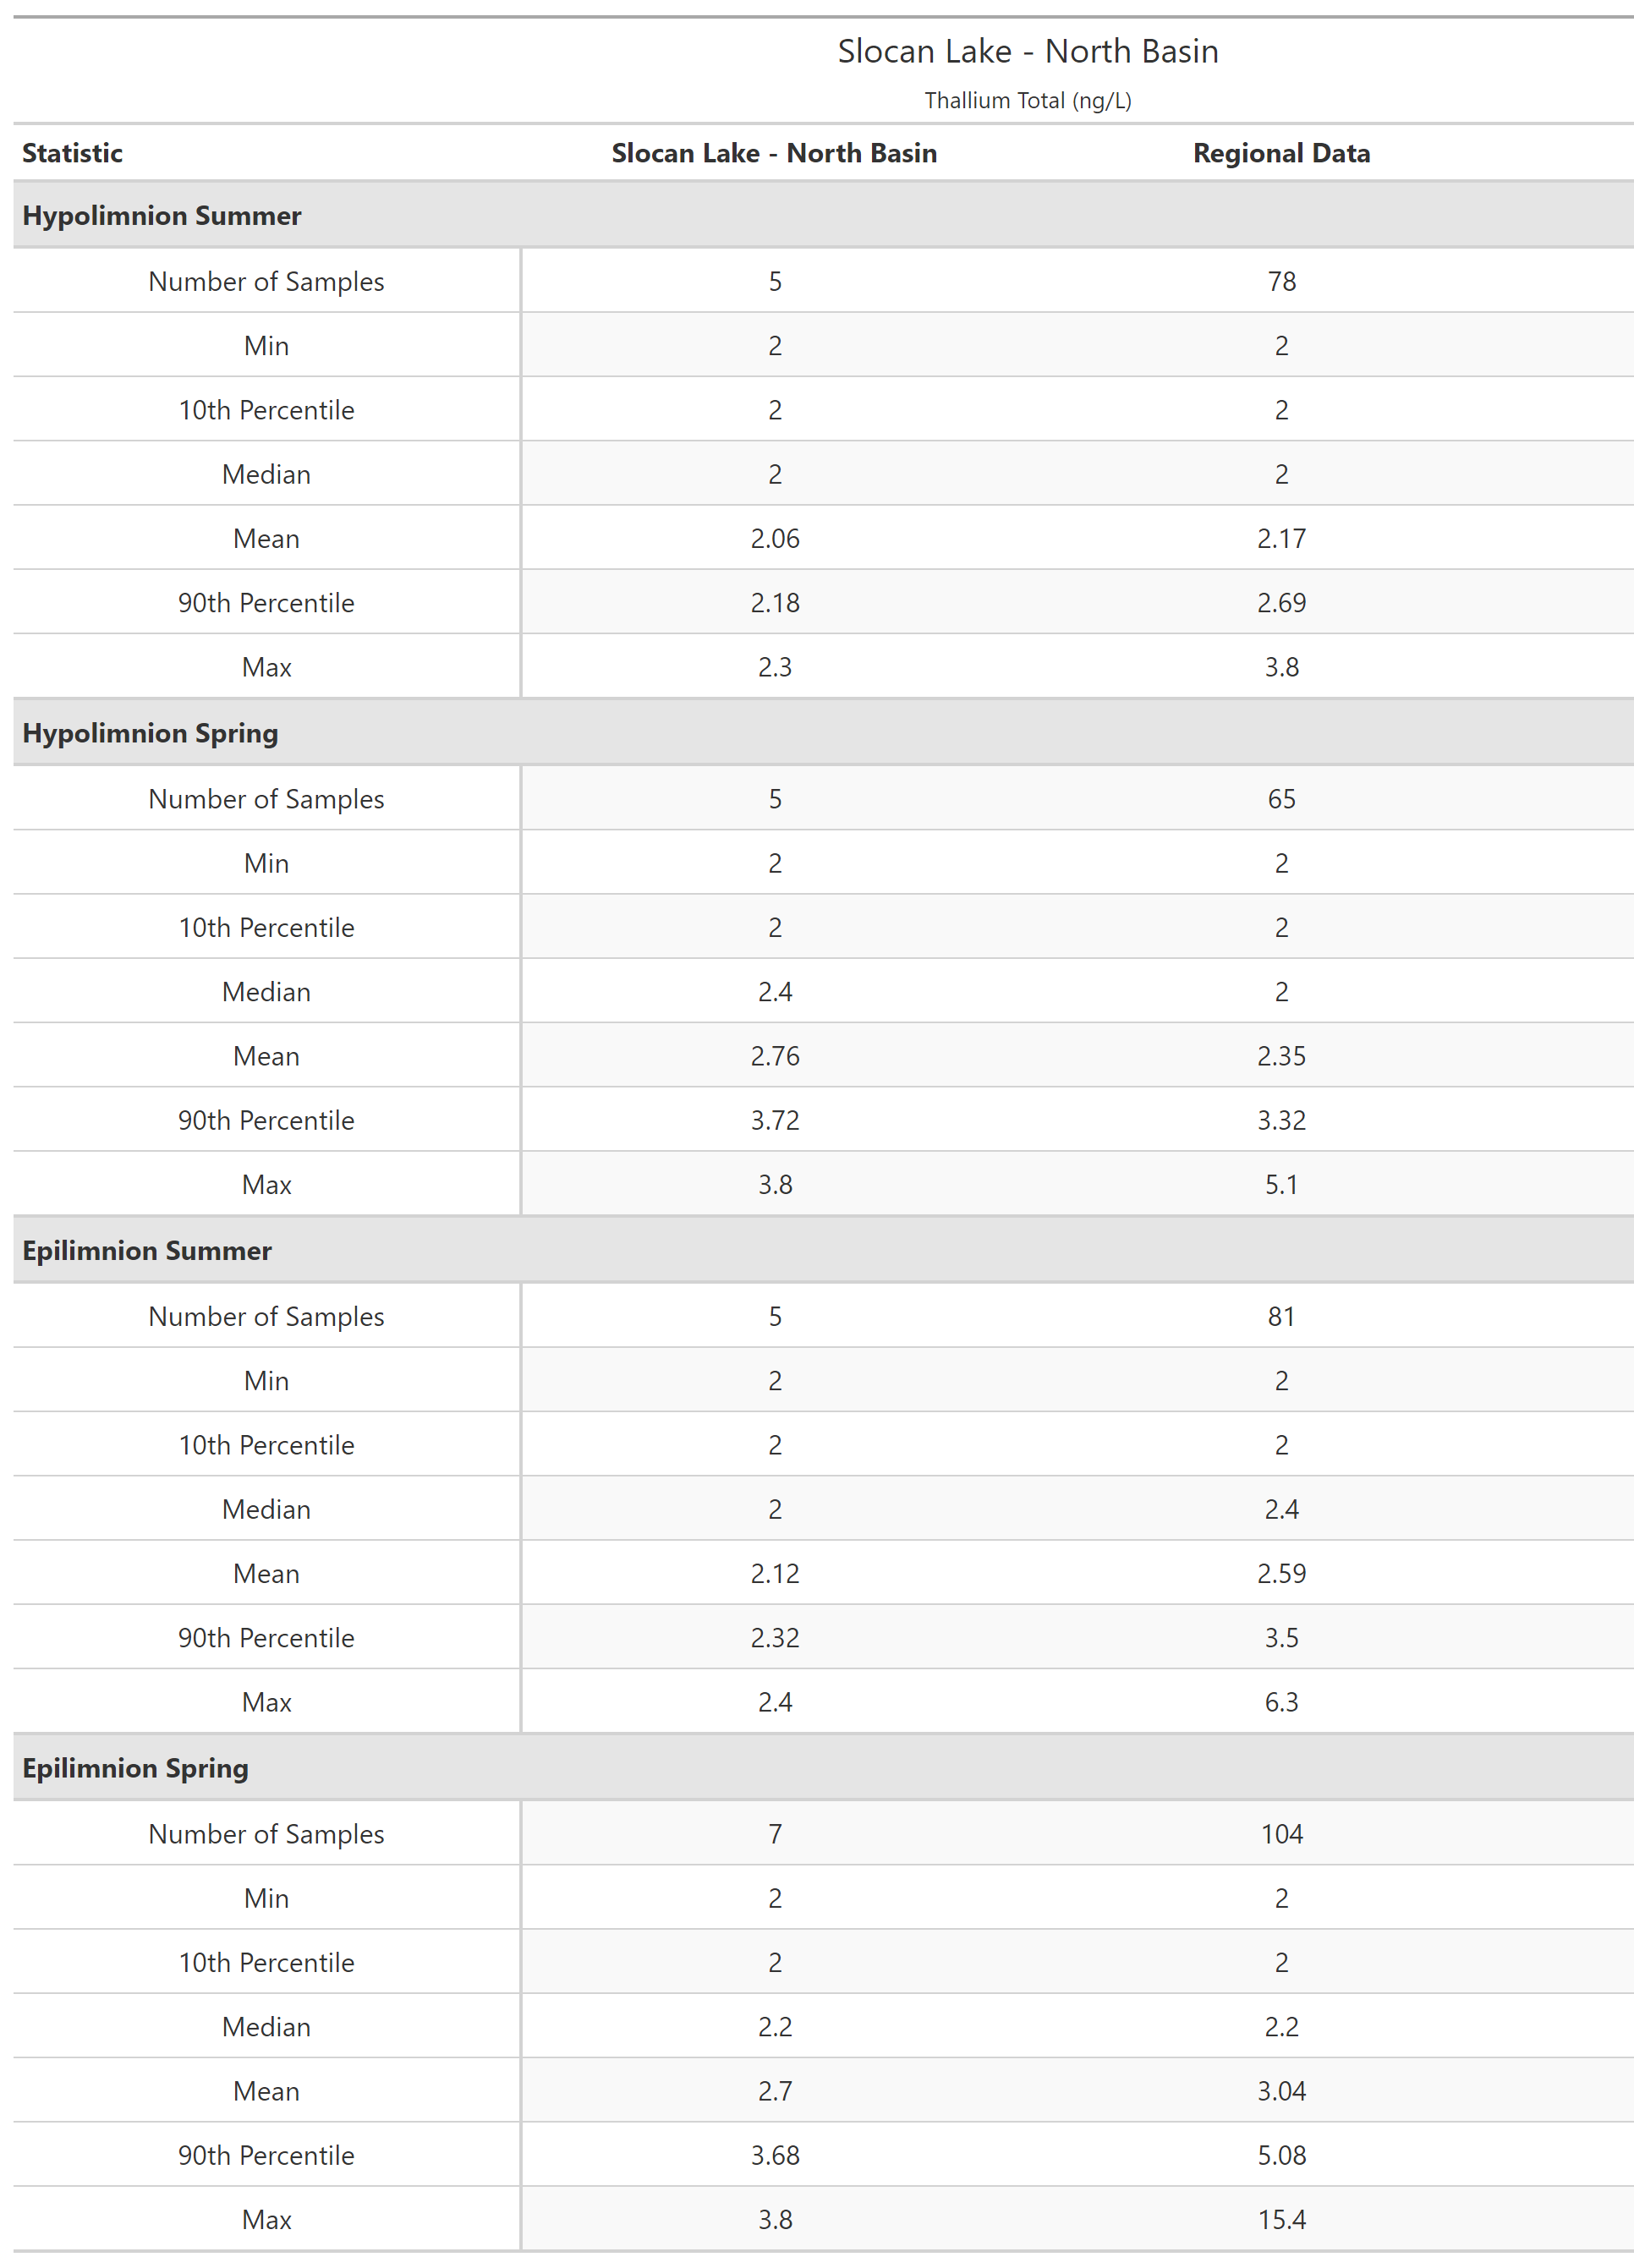 A table of summary statistics for Thallium Total with comparison to regional data